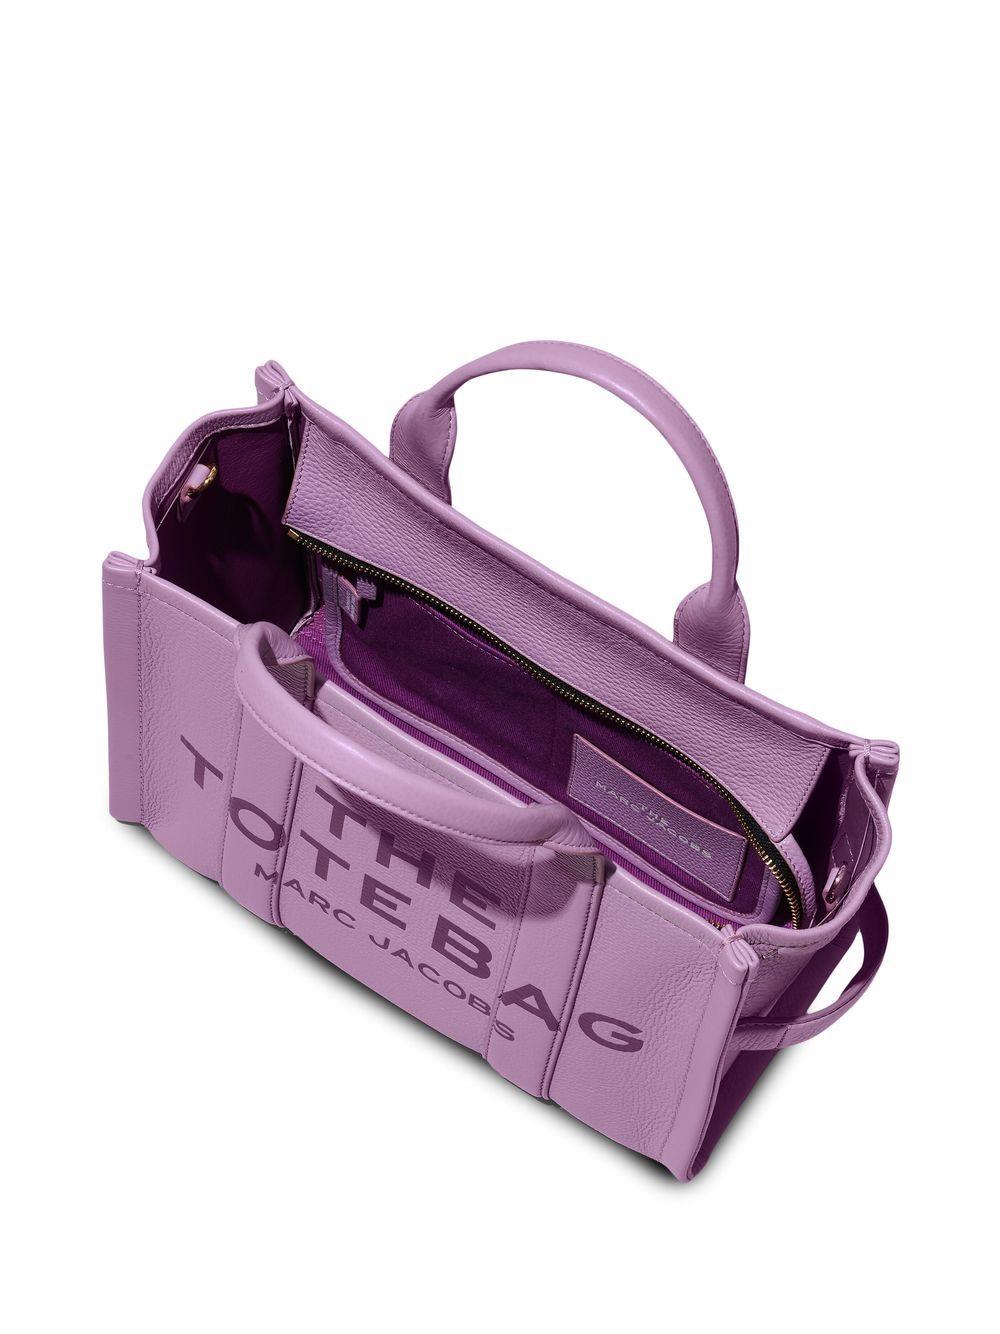 Marc Jacobs The Leather Small Tote Bag in Purple